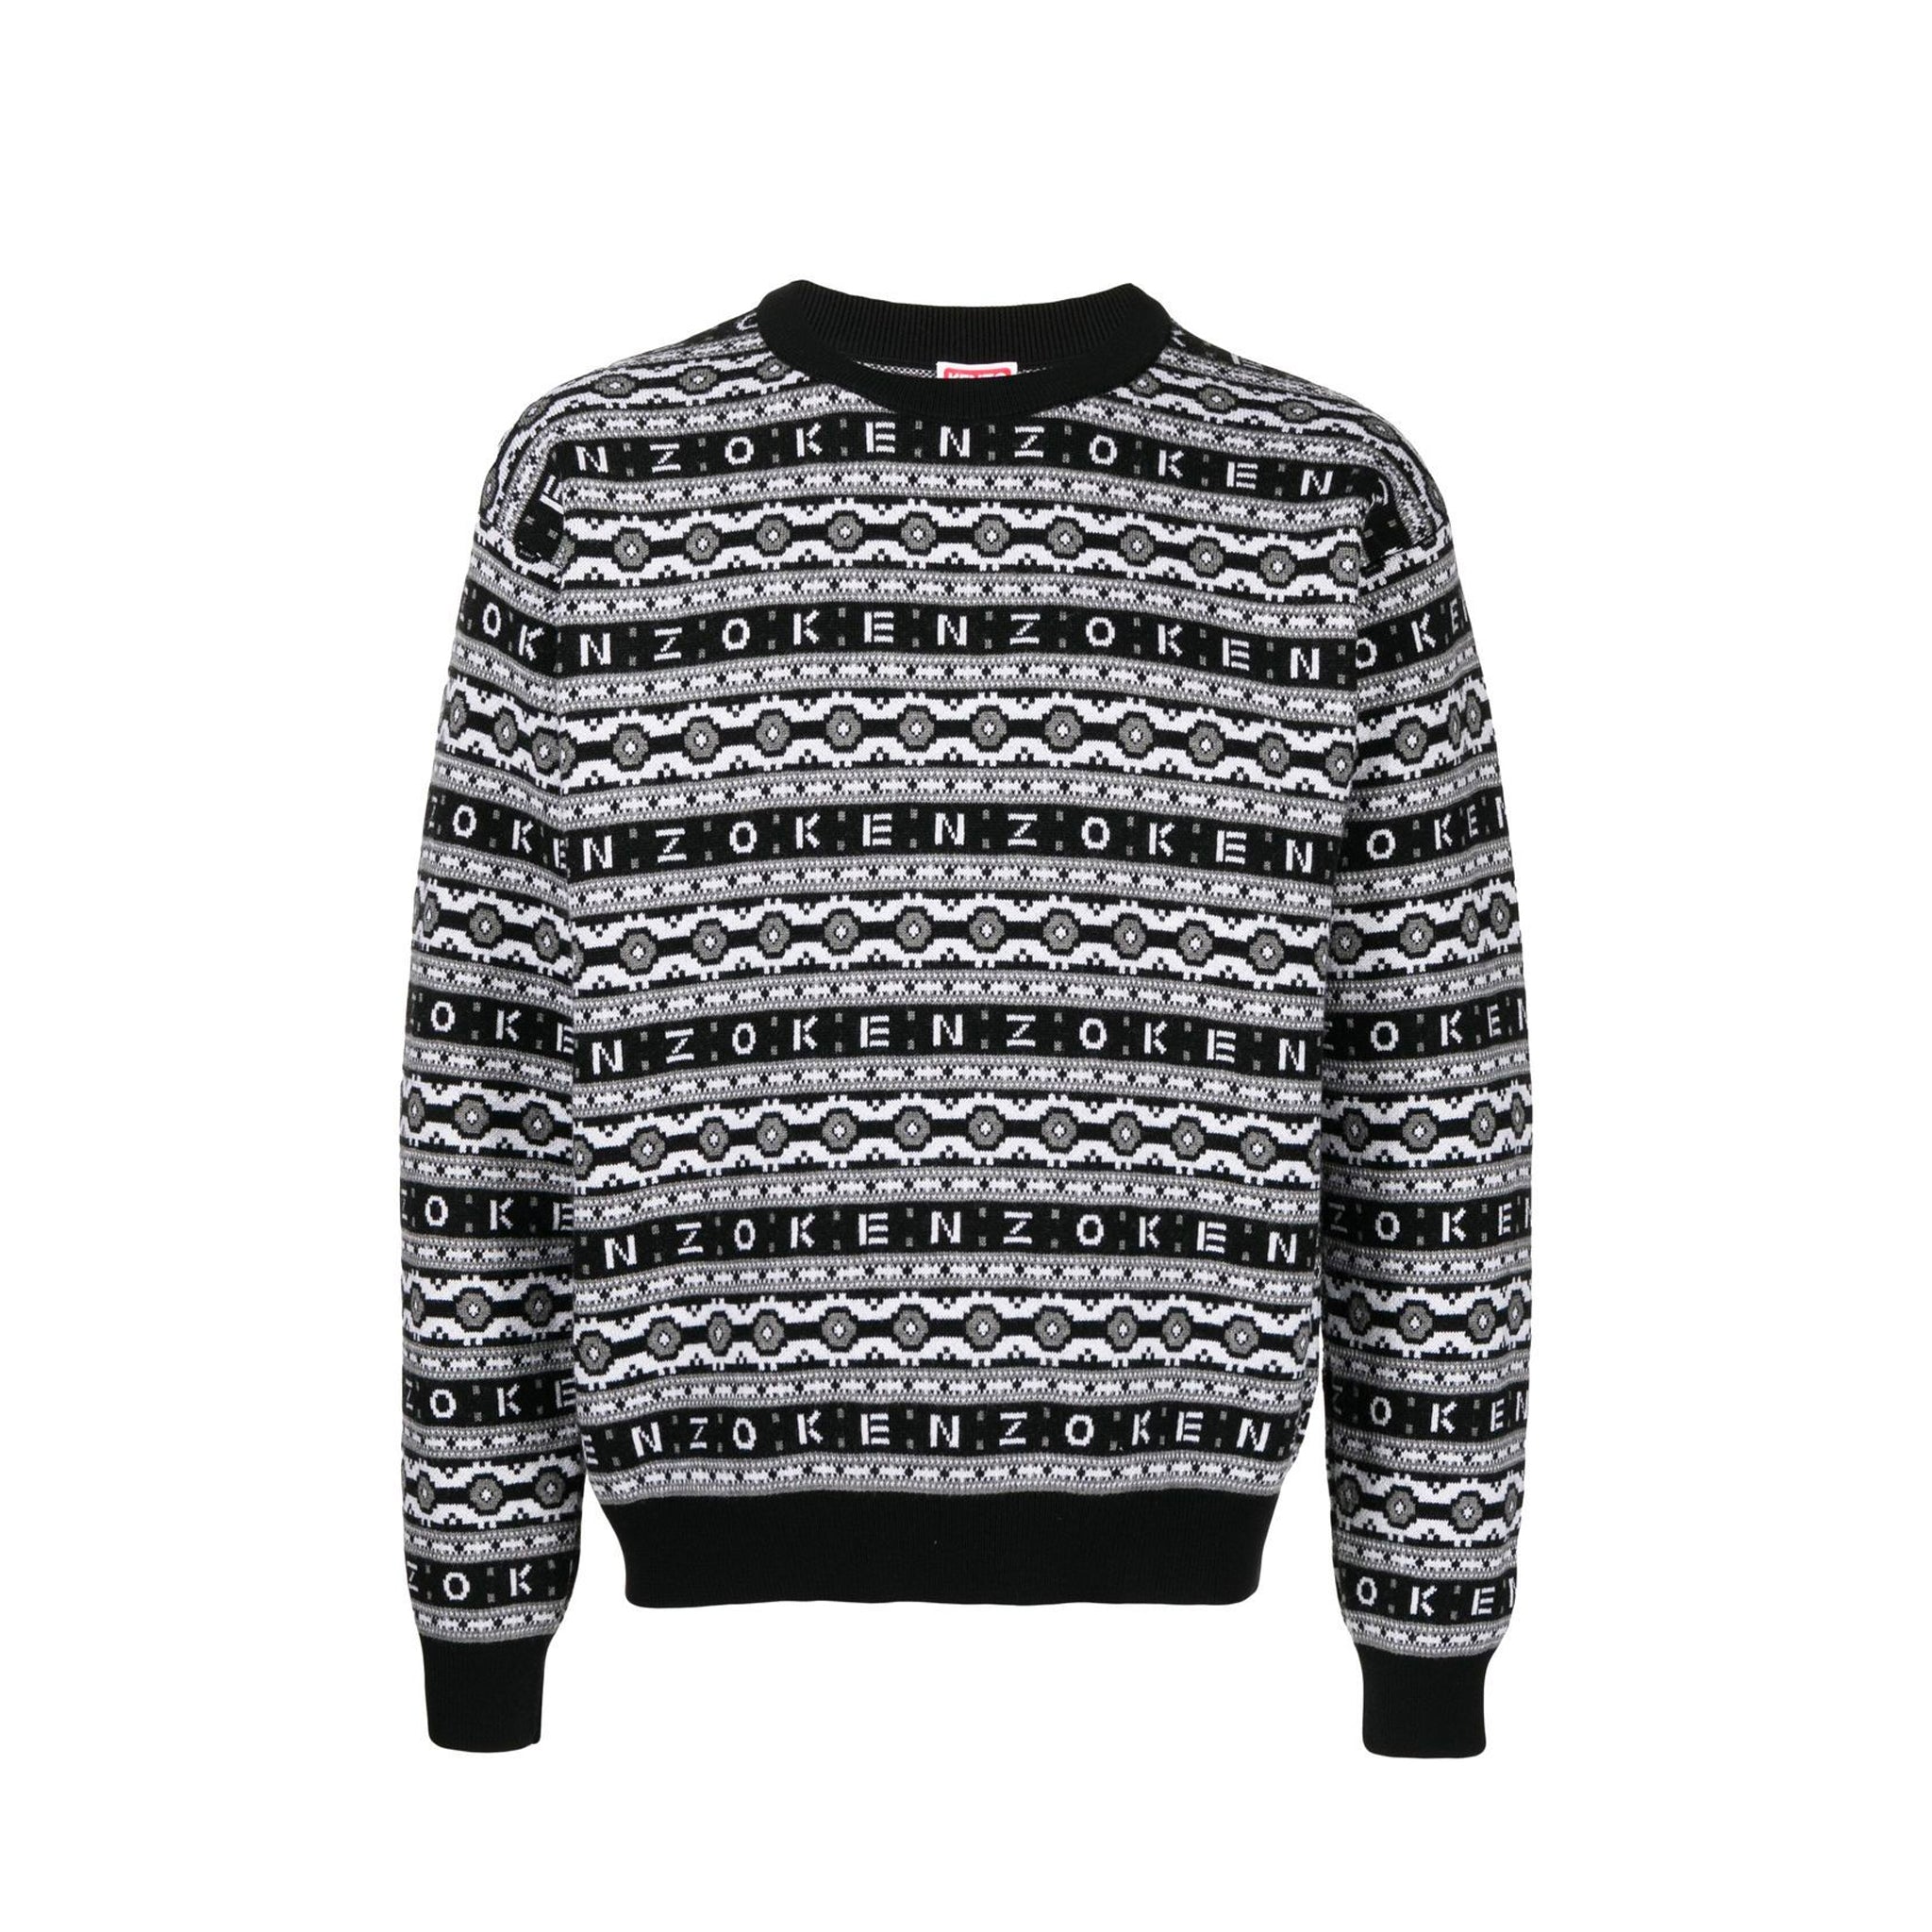 KENZO-OUTLET-SALE-Kenzo-Striped-Wool-Sweater-Strick-ARCHIVE-COLLECTION.jpg